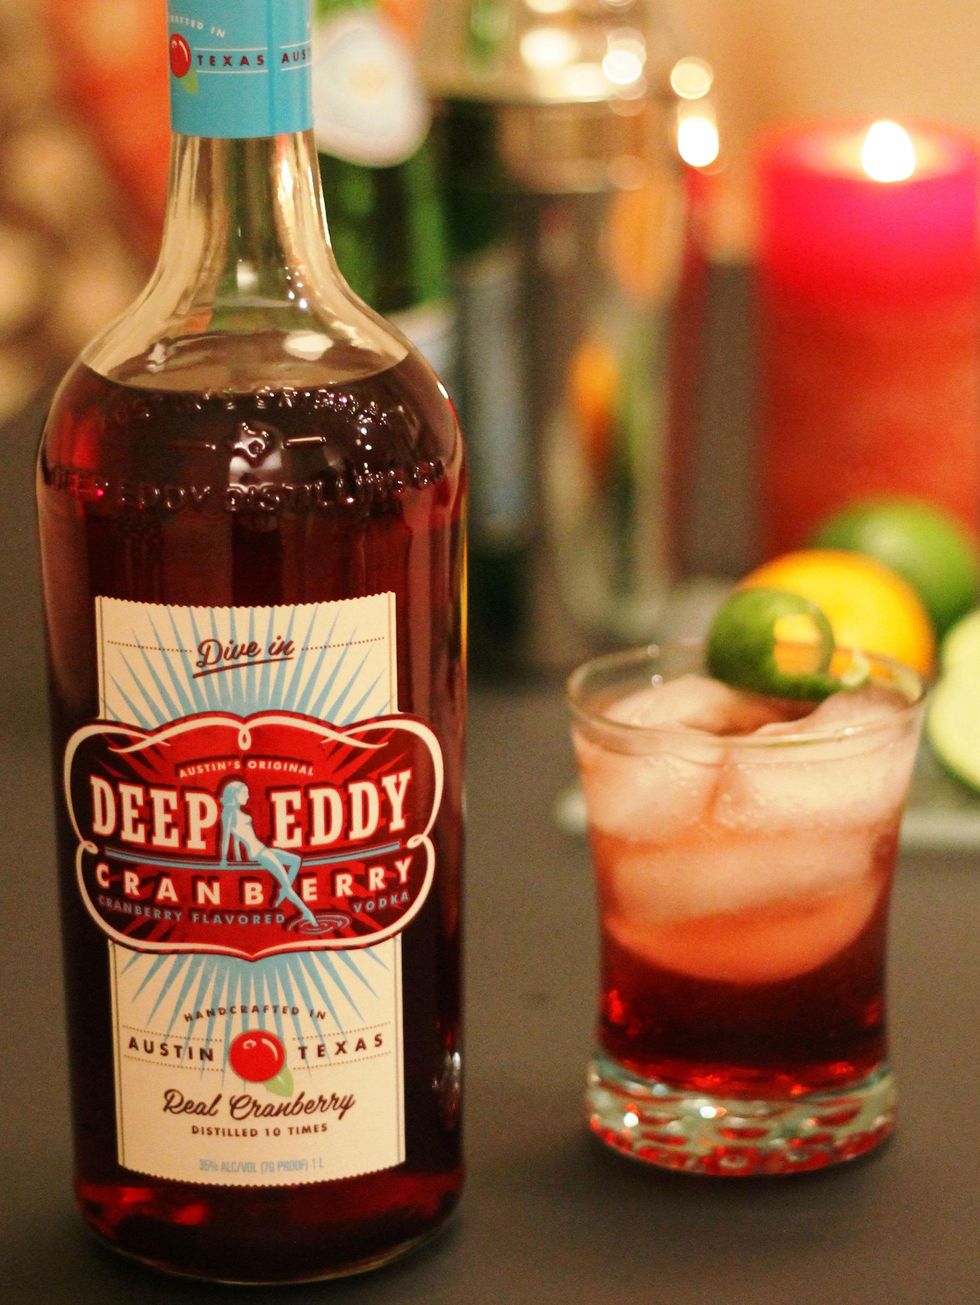 Deep Eddy Vodka And Absolut Unveil Tasty New Flavors With Texas Roots Culturemap Austin 9408